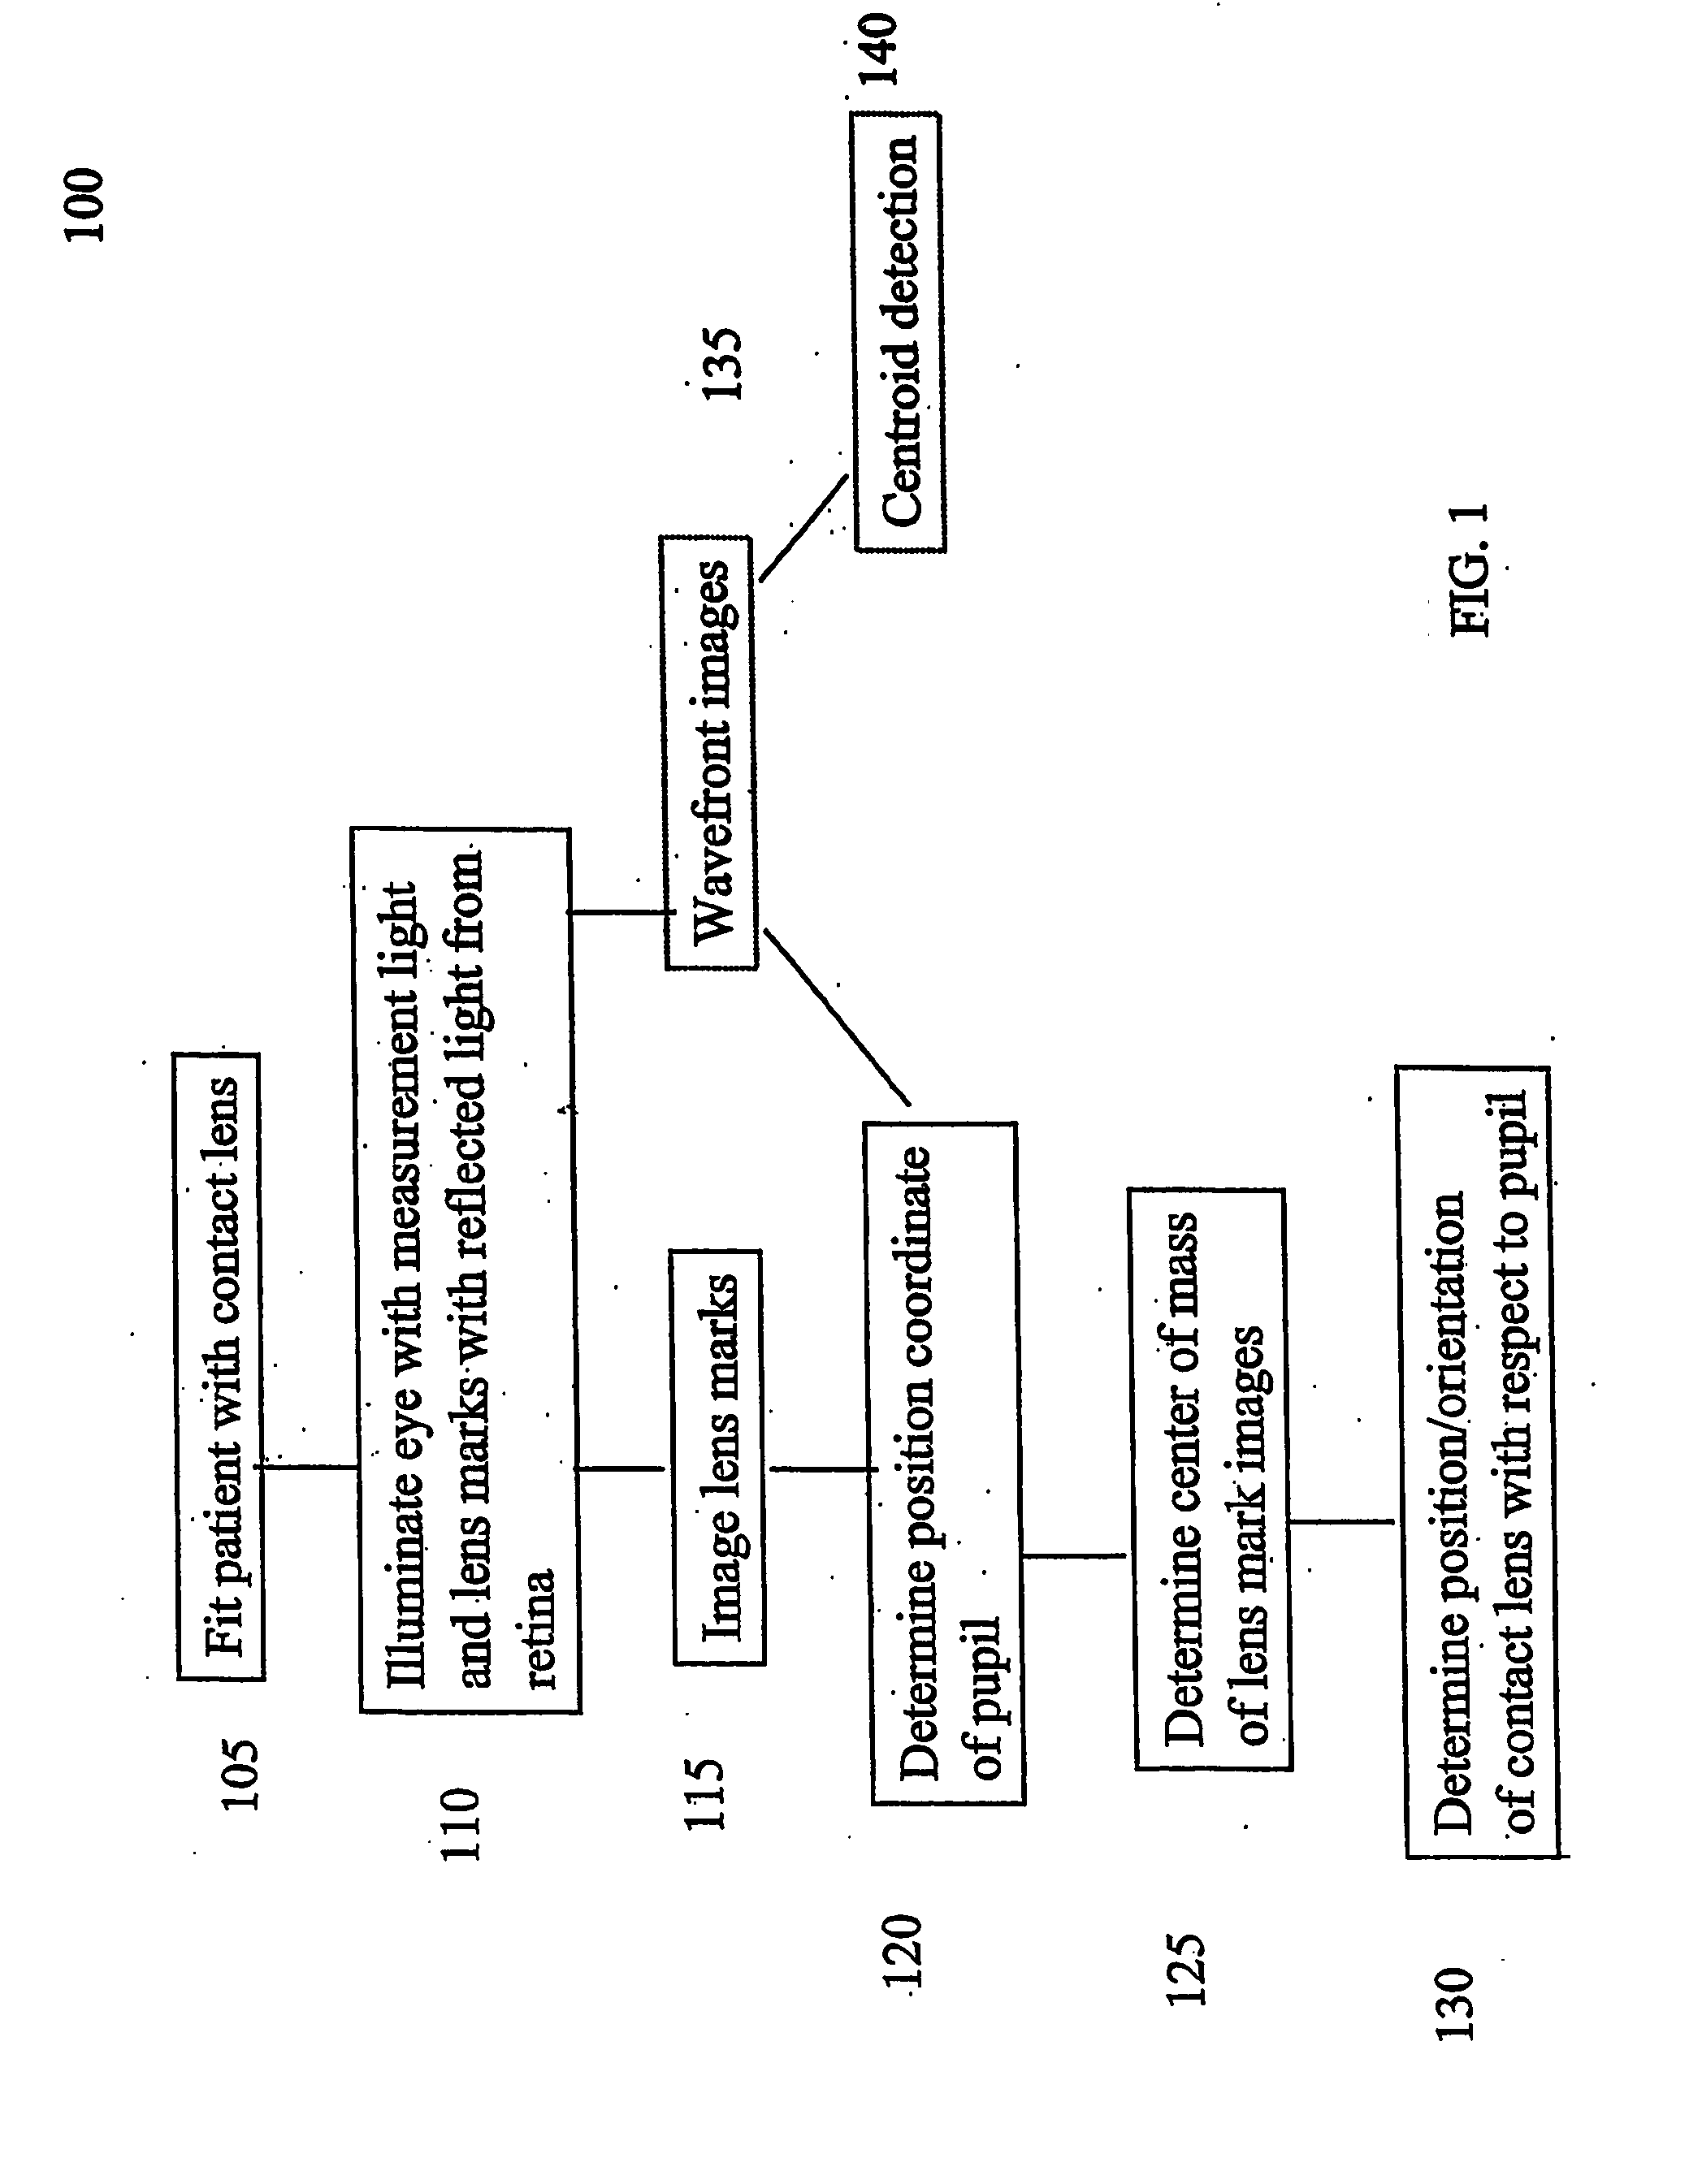 Method and Apparatus for Online Contact Lens Evaluation